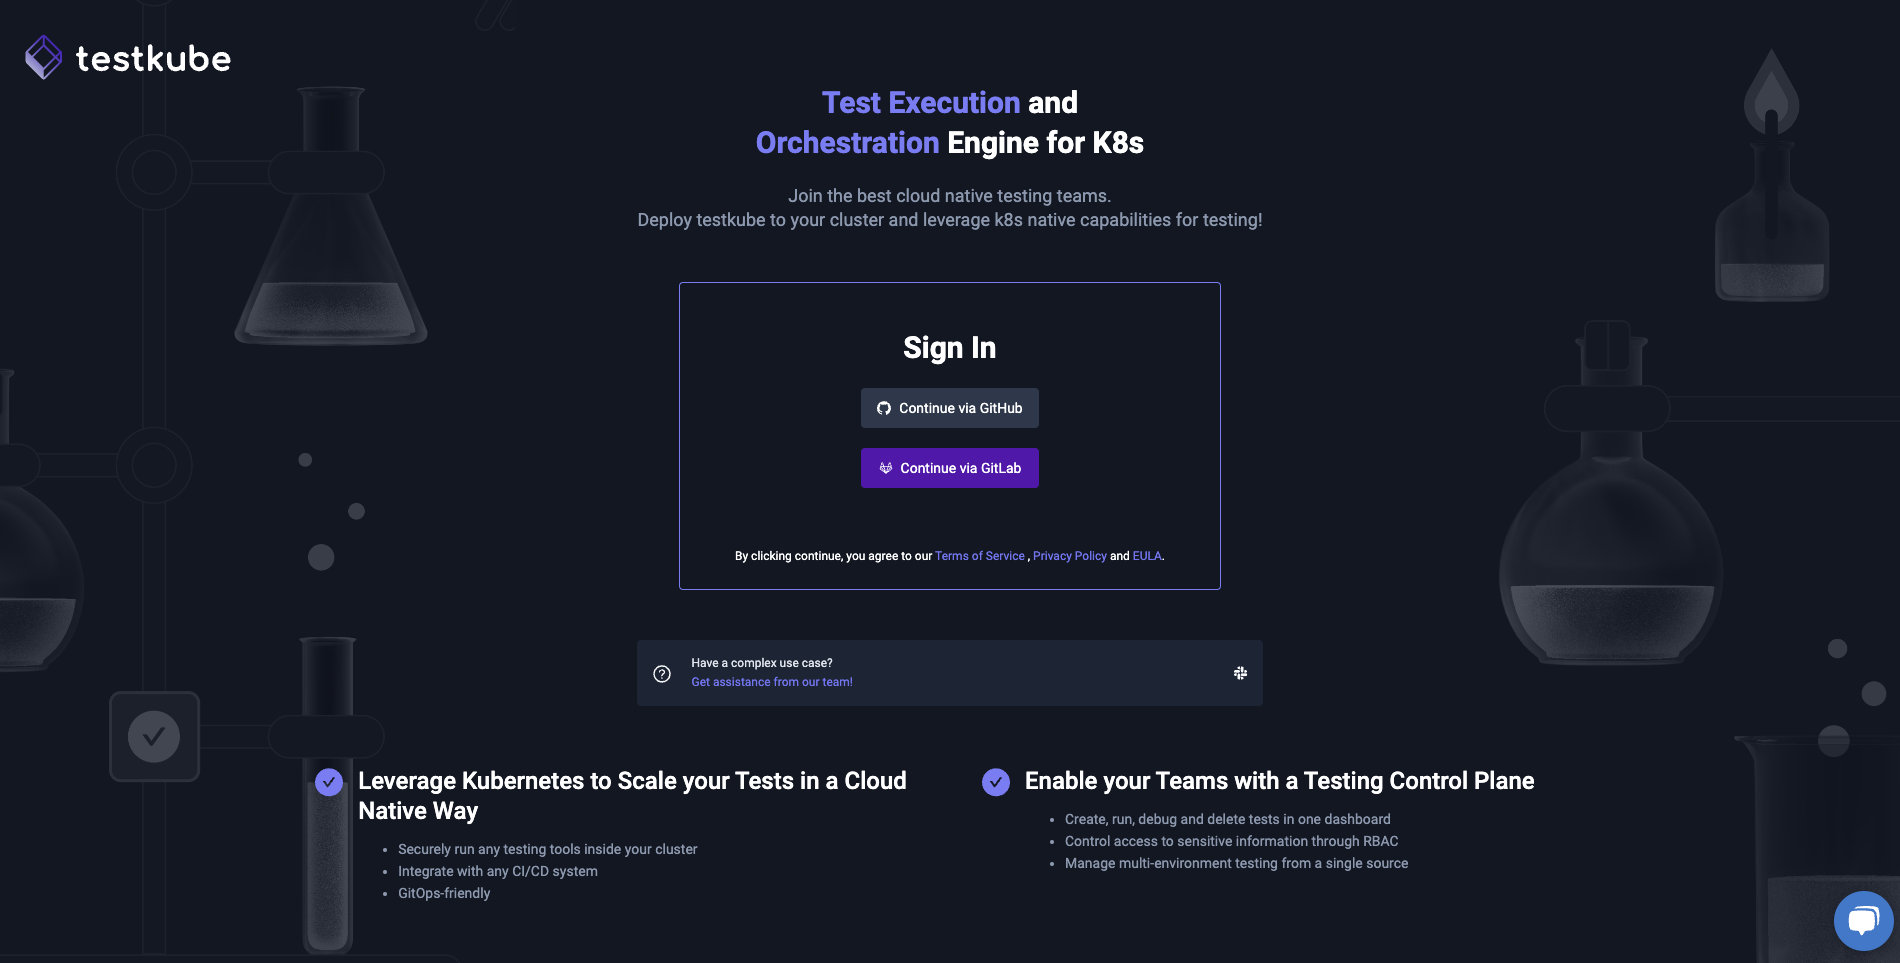 Sign in to Testkube